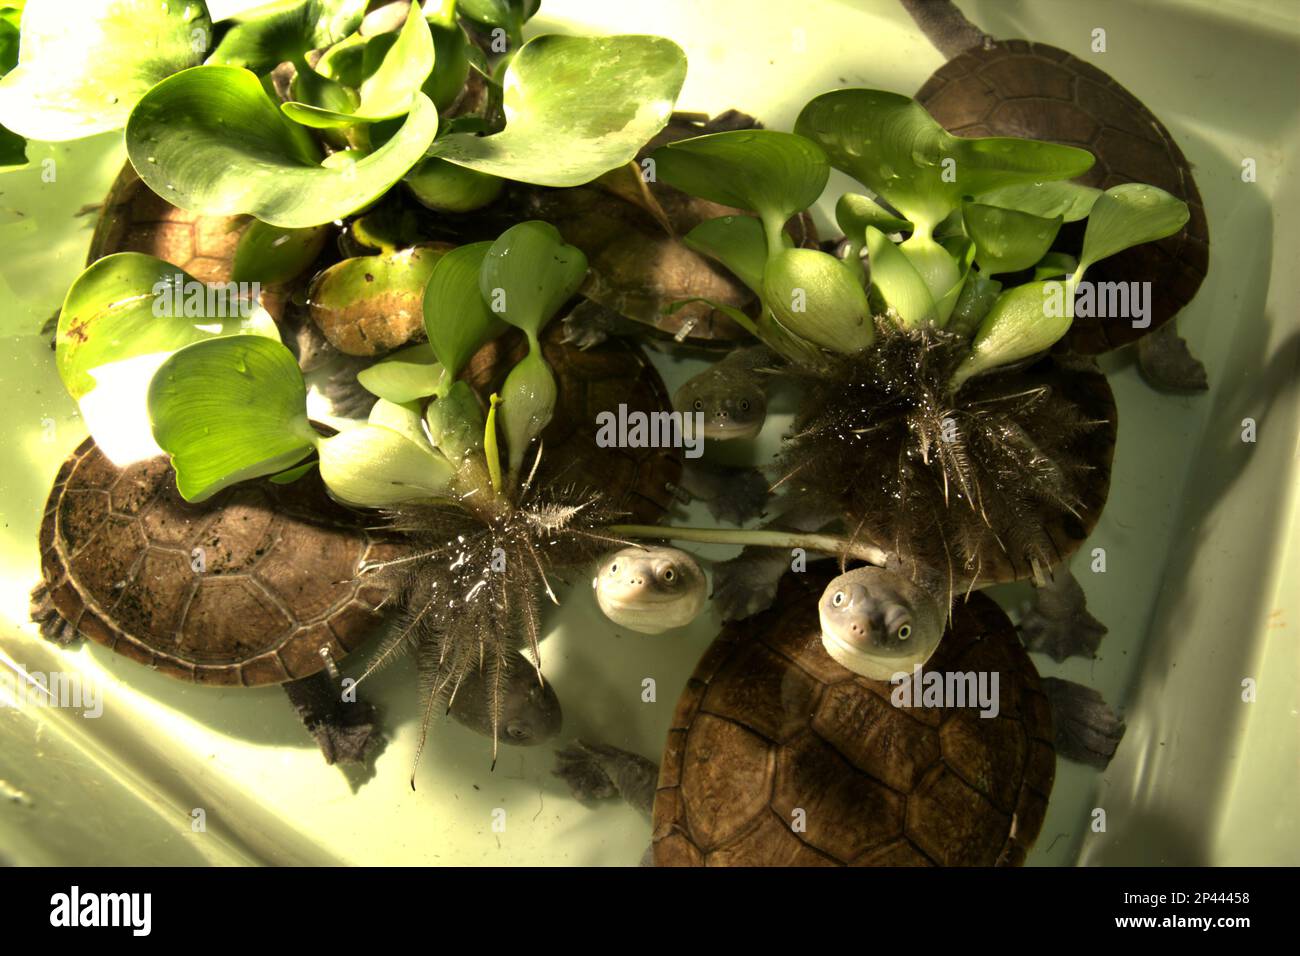 Rare and threatened species of freshwater turtle, the critically endangered Rote Island's endemic snake-necked turtles (Chelodina mccordi) at a licensed ex-situ wildlife breeding farm in Jakarta, Indonesia. Stock Photo